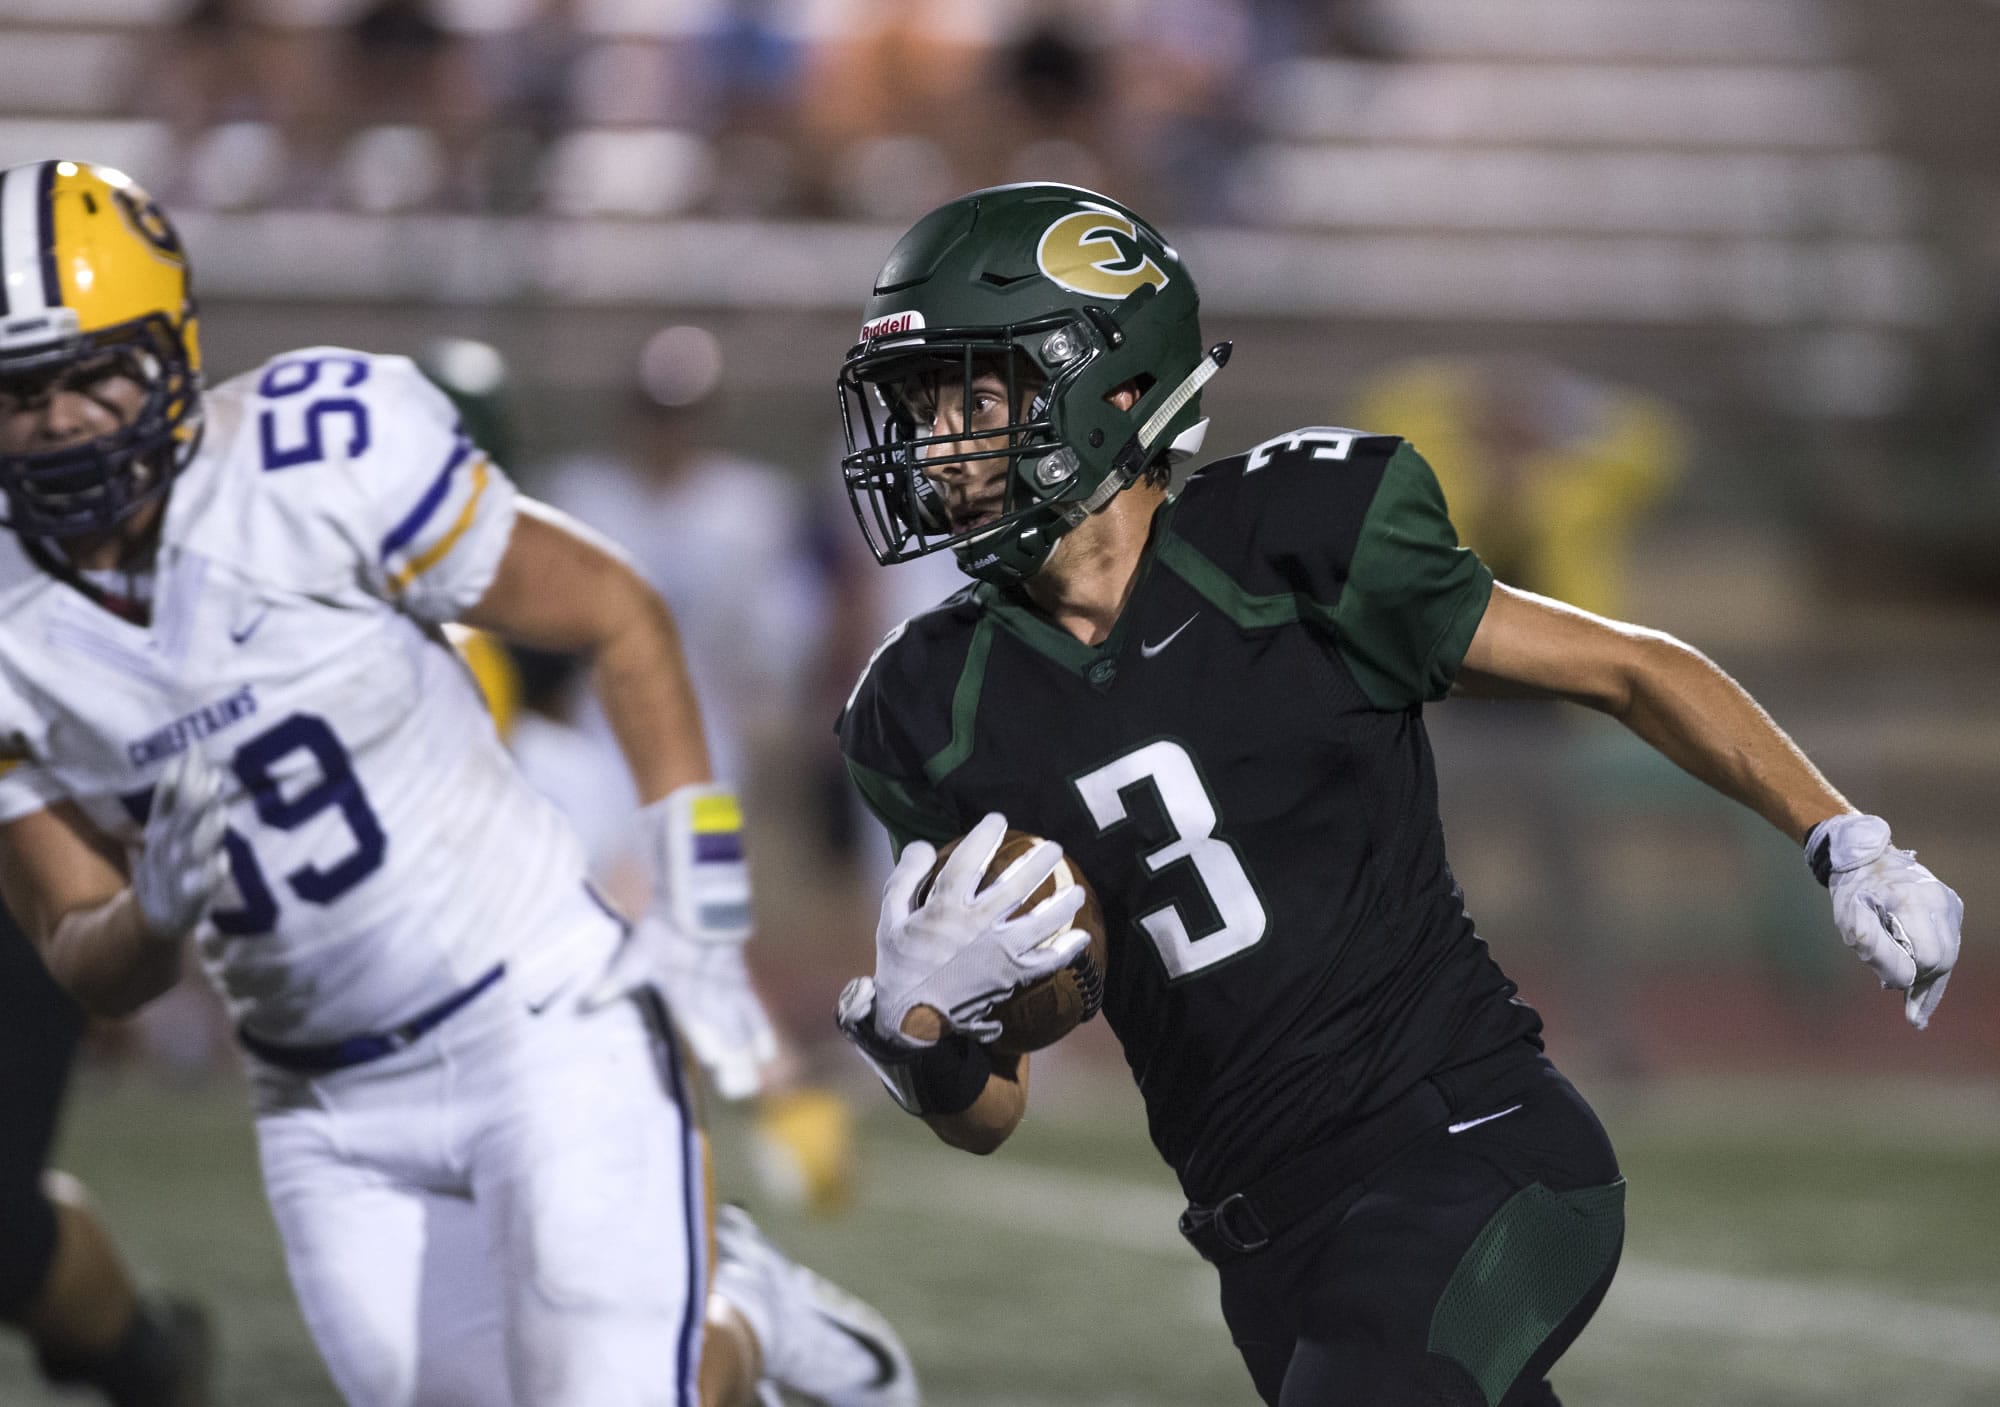 Evergreen's Nadil Hodzic (3) runs the ball during Friday night's game against Columbia River at McKenzie Stadium on Sept. 1, 2017.